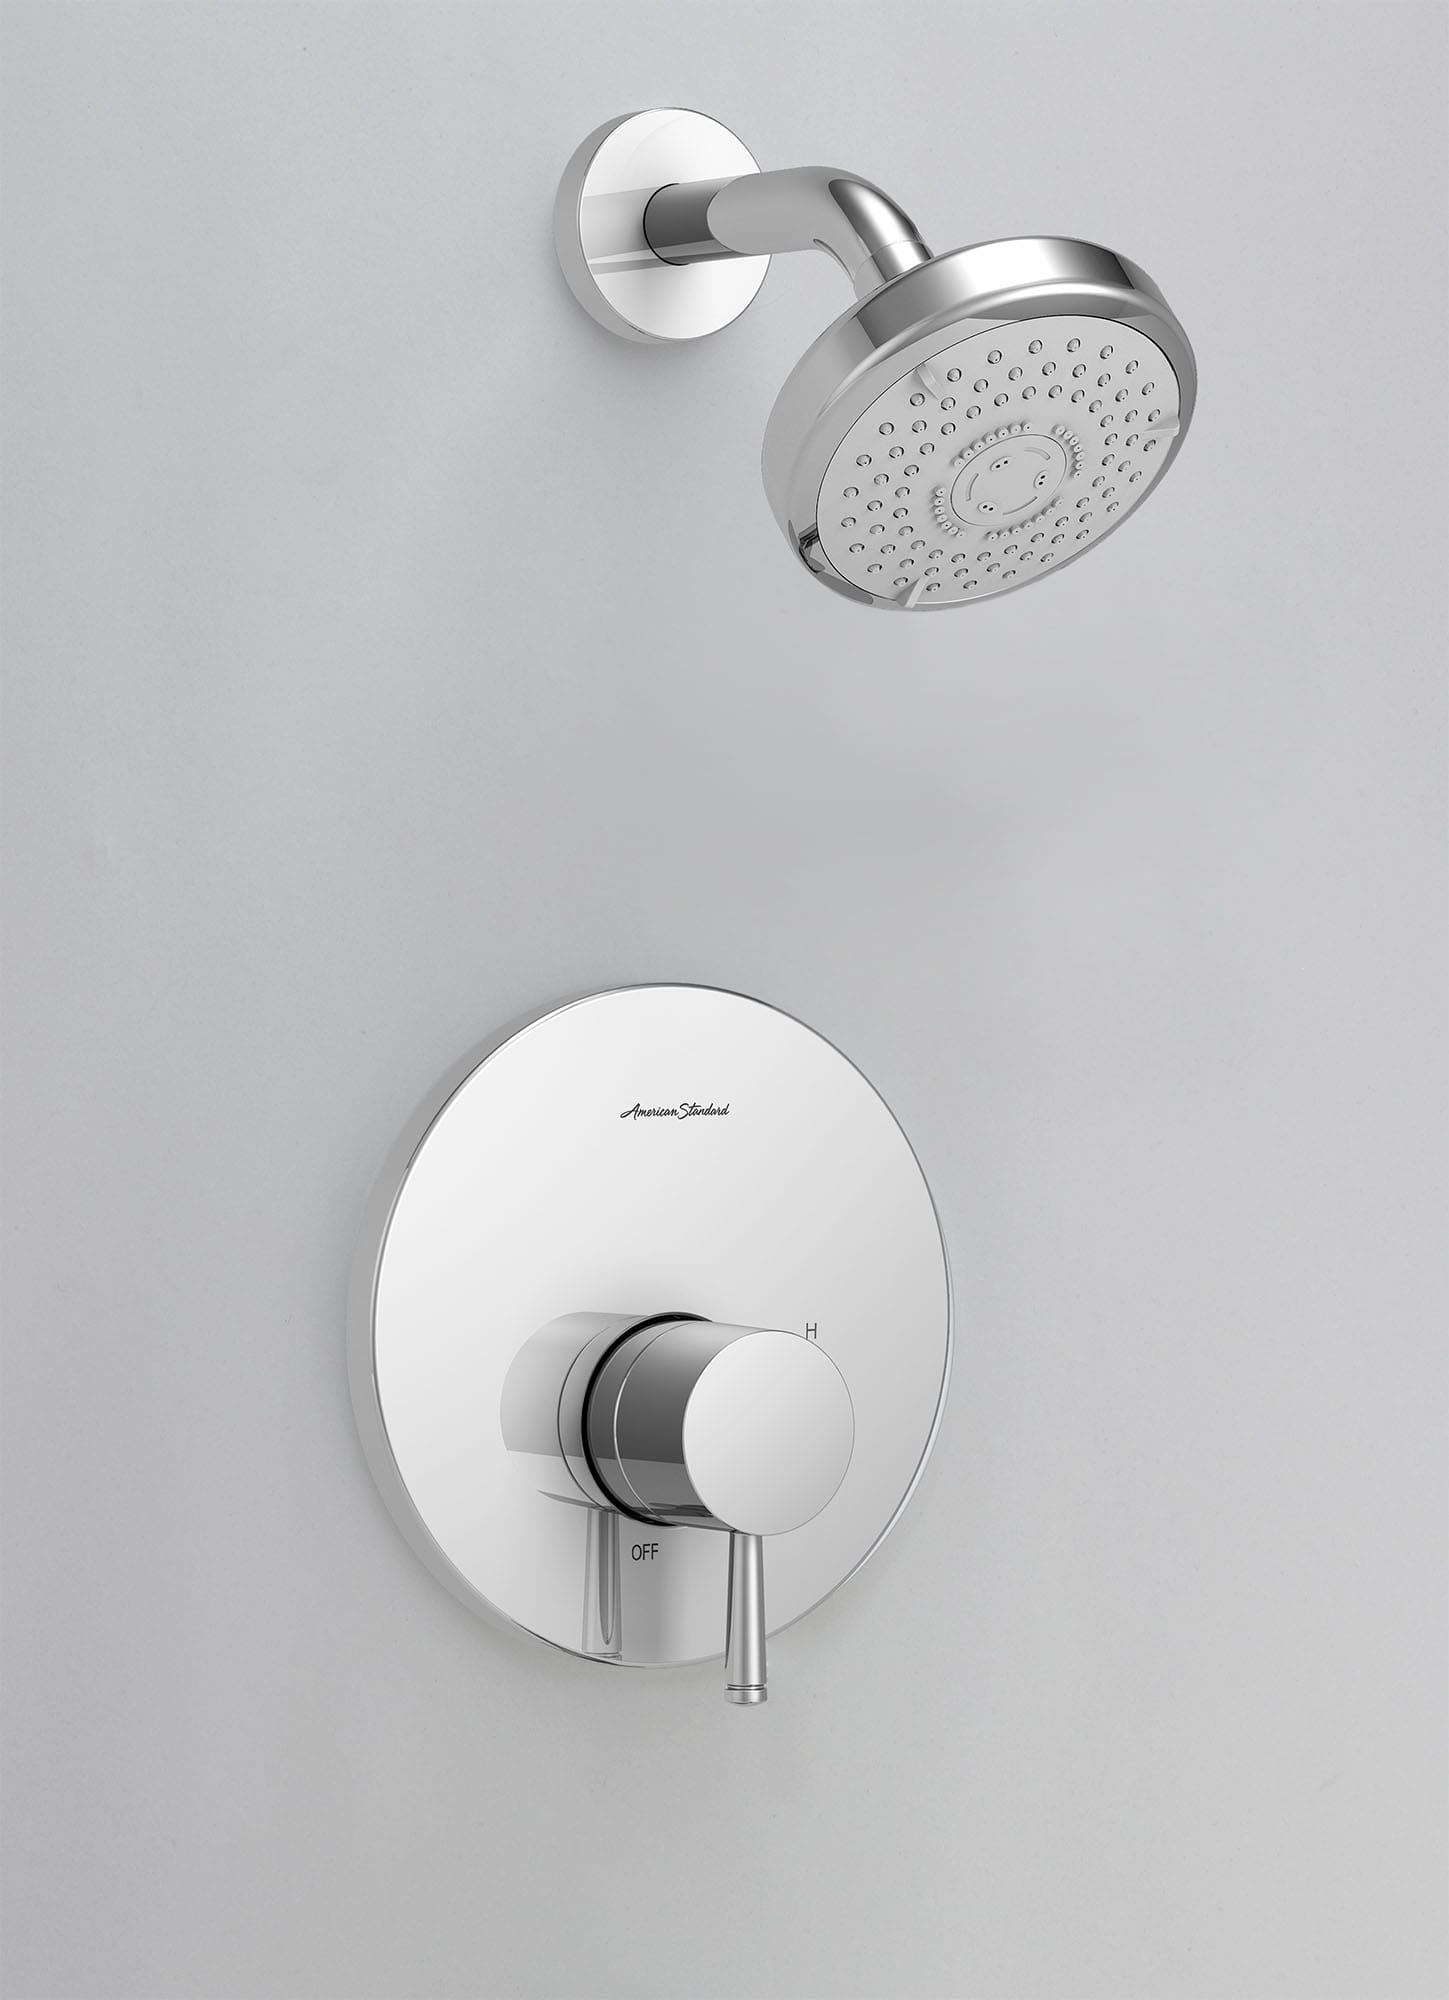 Serin 175 gpm 66 L min Tub and Shower Trim Kit With Water Saving 3 Function Shower Head Double Ceramic Pressure Balance Cartridge With Lever Handle CHROME